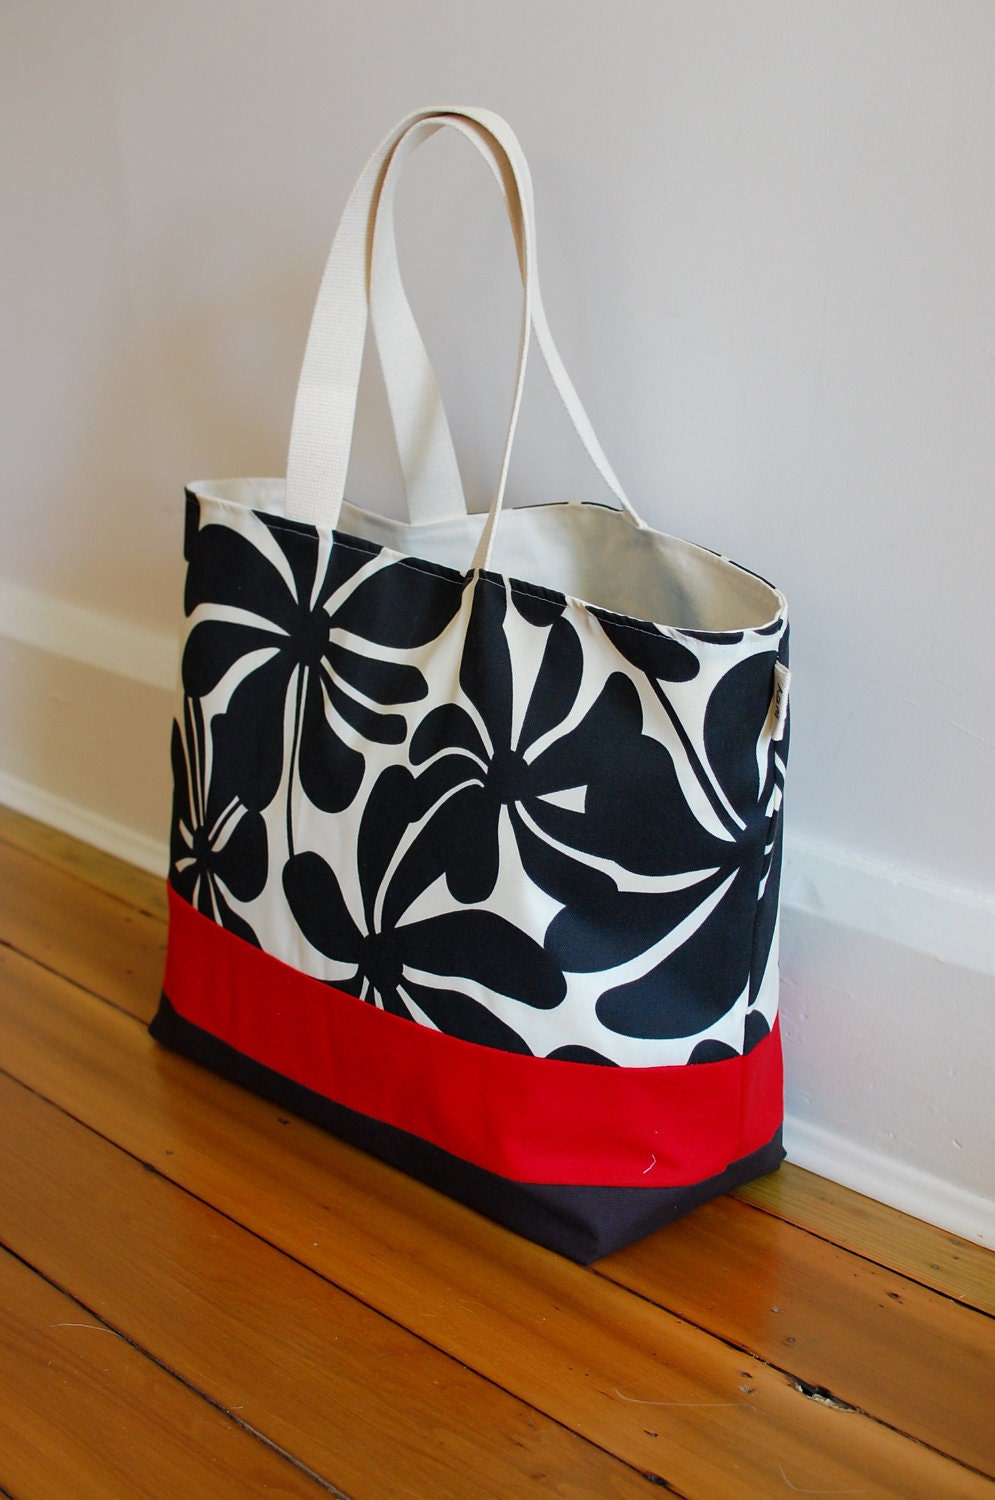 EXTRA Large Beach Bag // Tote in Black Floral by LucyJaneTotes